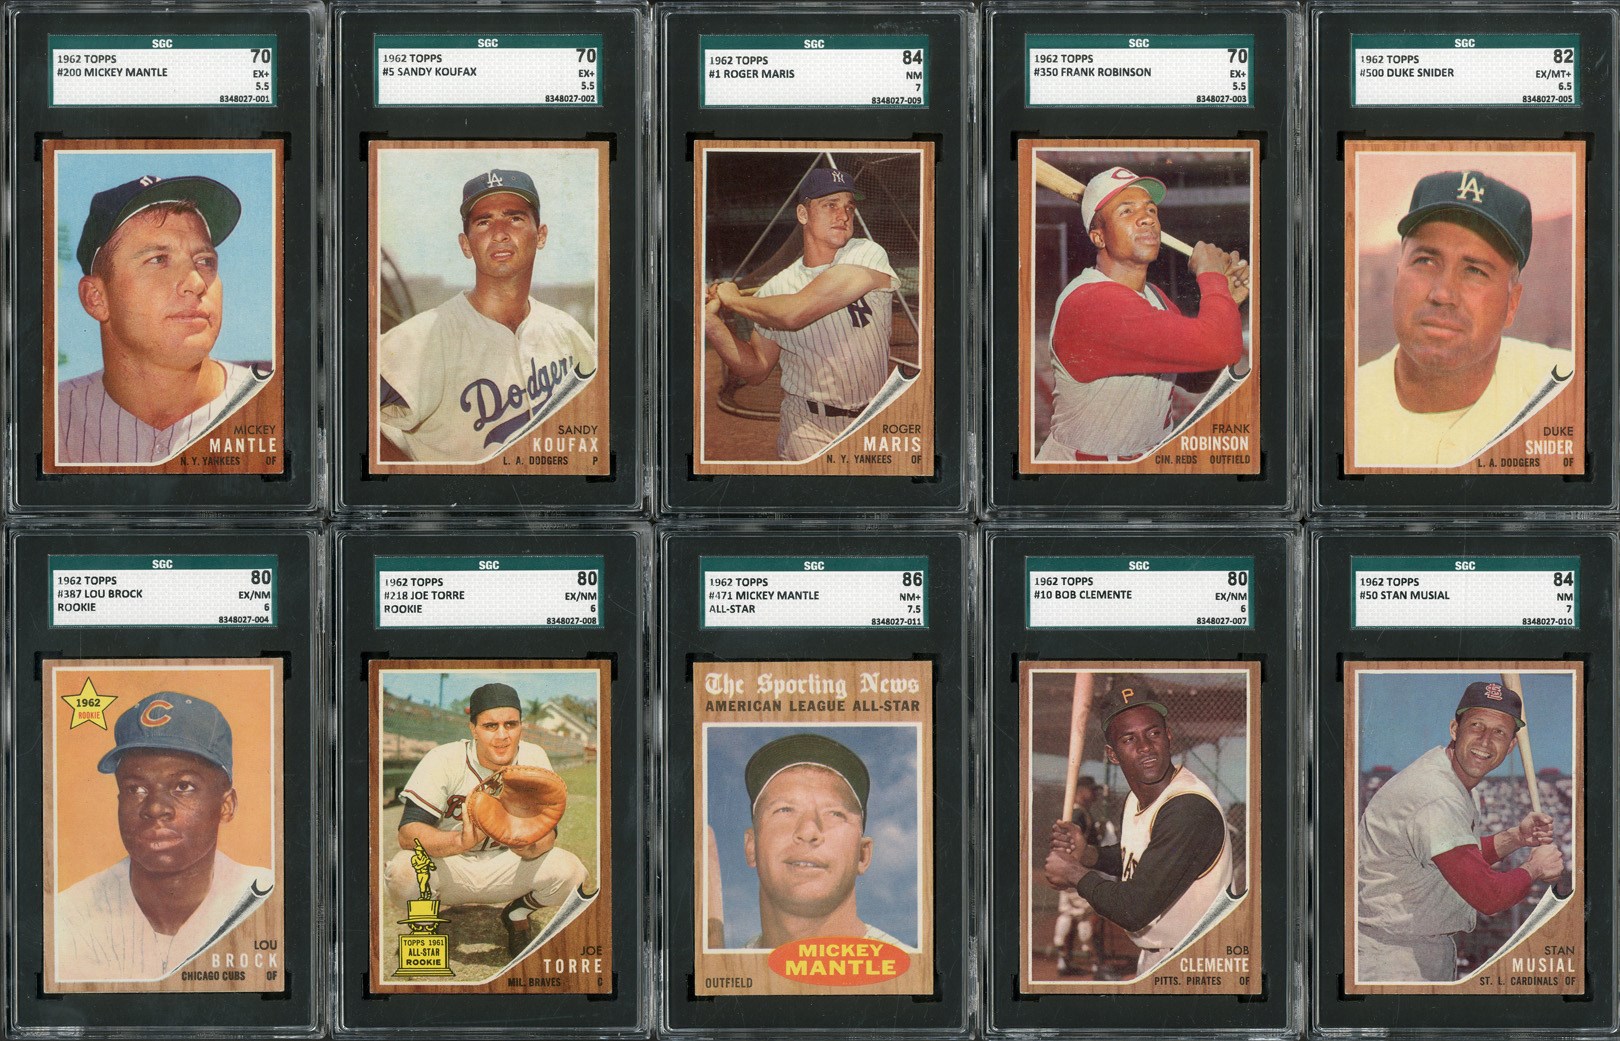 1962 Topps Complete Set of 598 Cards (11 SGC Graded)